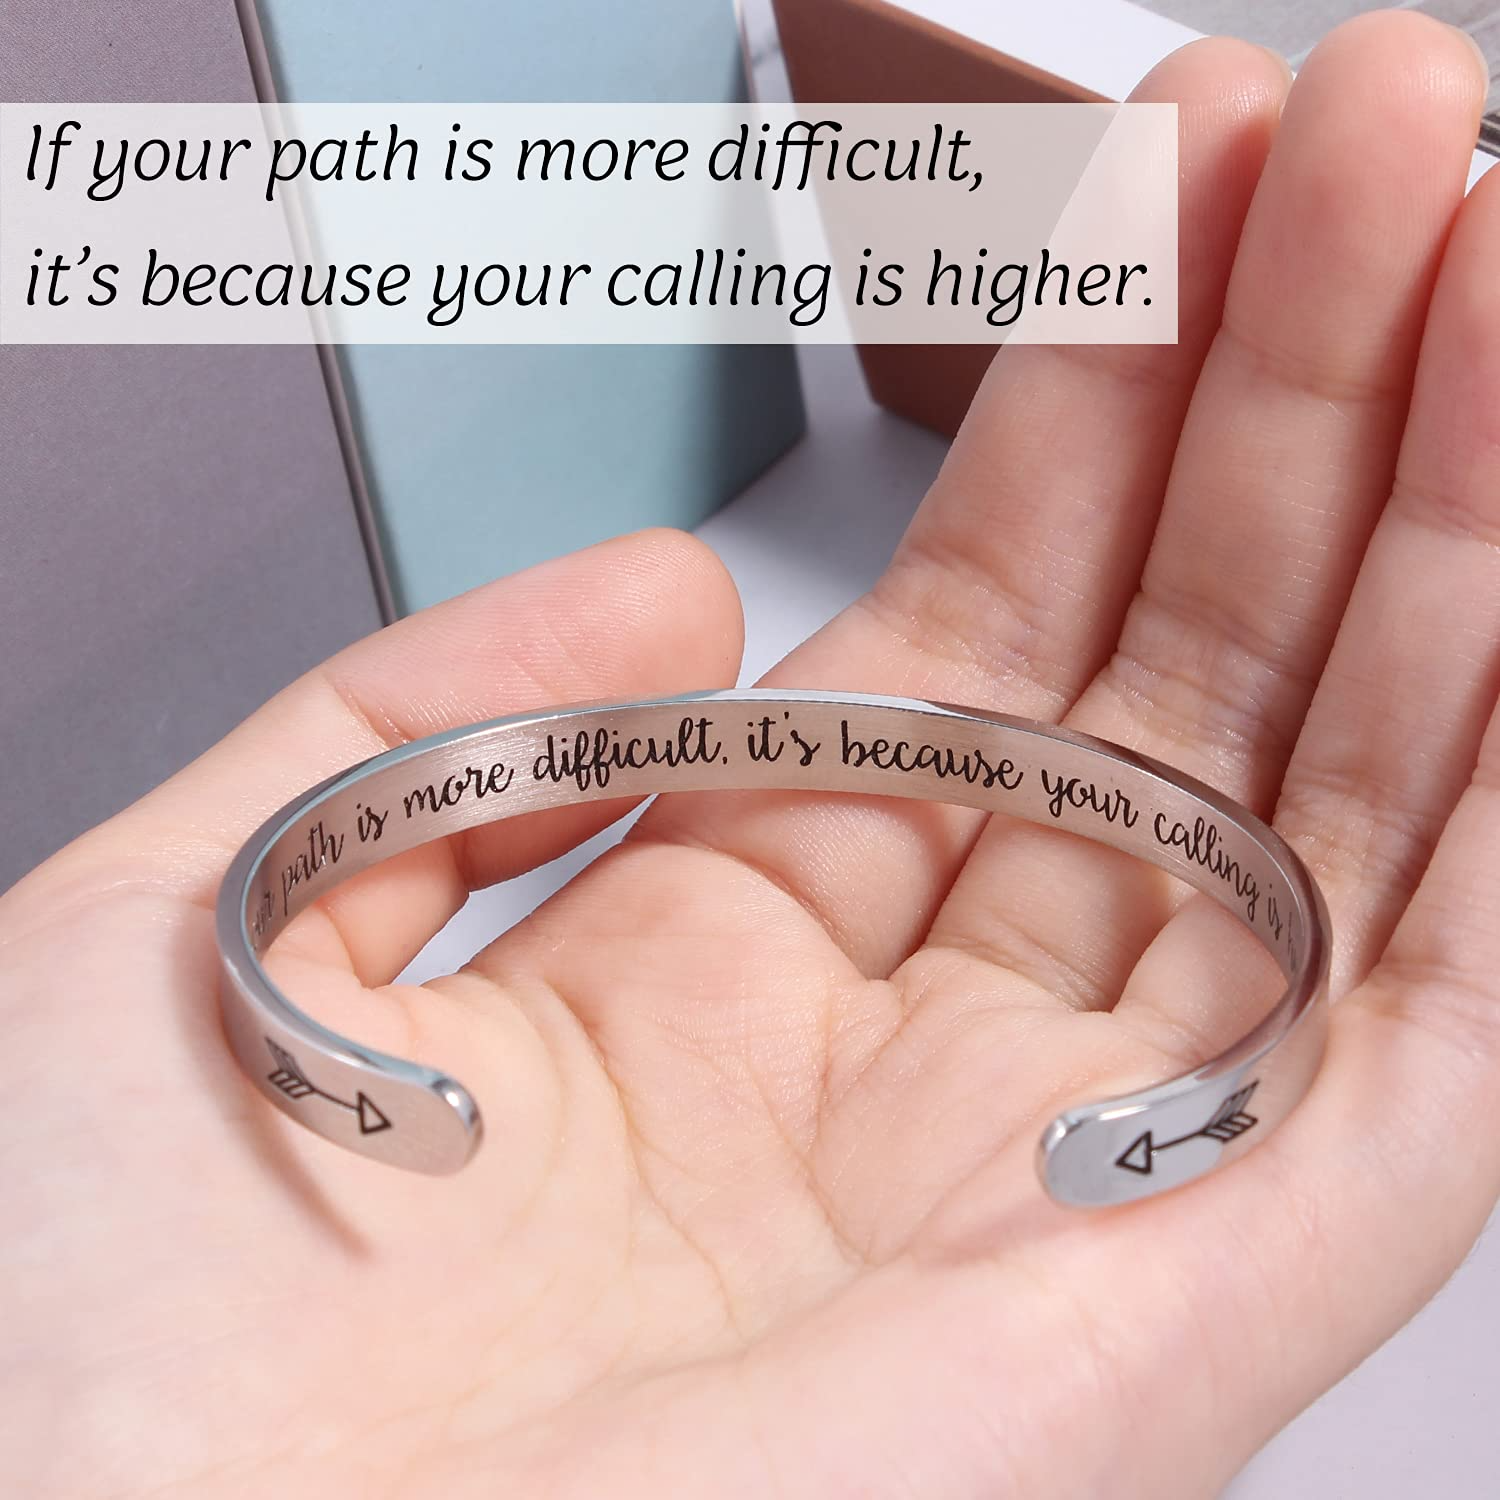 If your path is more difficult it’s because your calling is higher